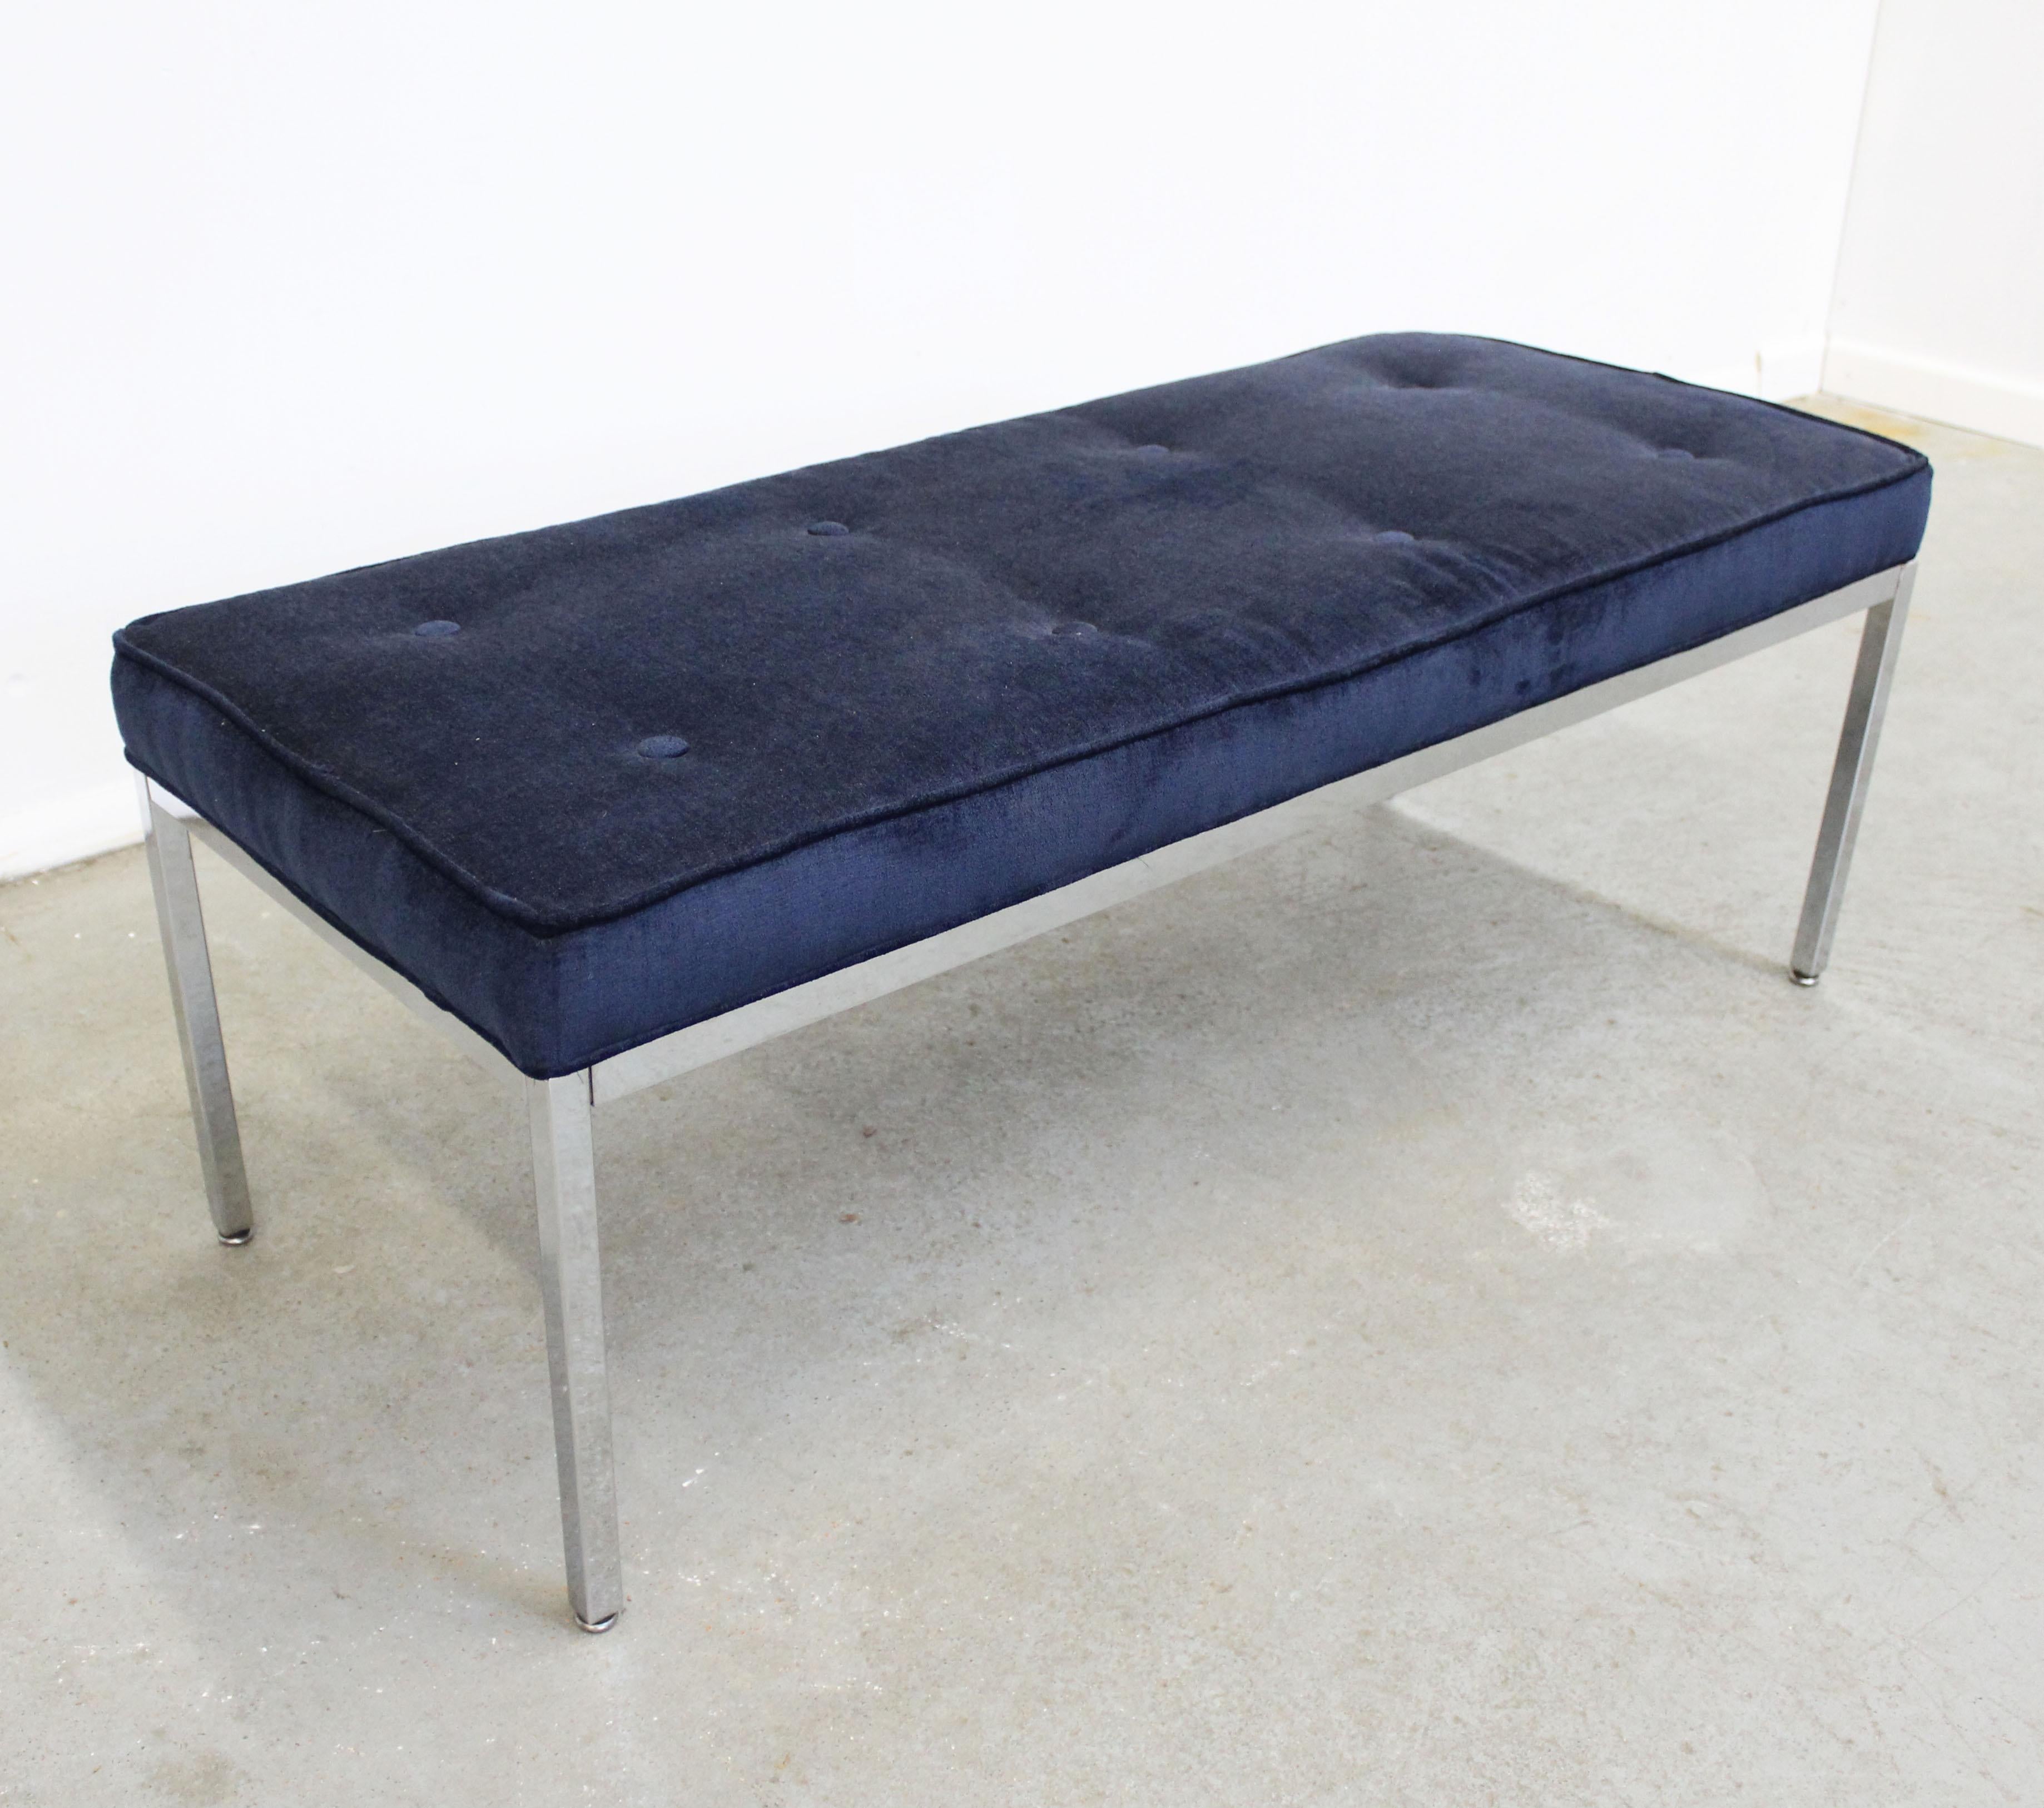 Offered is a gorgeous mid century modern style chrome bench with blue upholstery. In good used condition, shows minor surface wear/scratches on chrome. Upholstery is in excellent conditions, no odors, stains, or tears. It is not signed. Check out